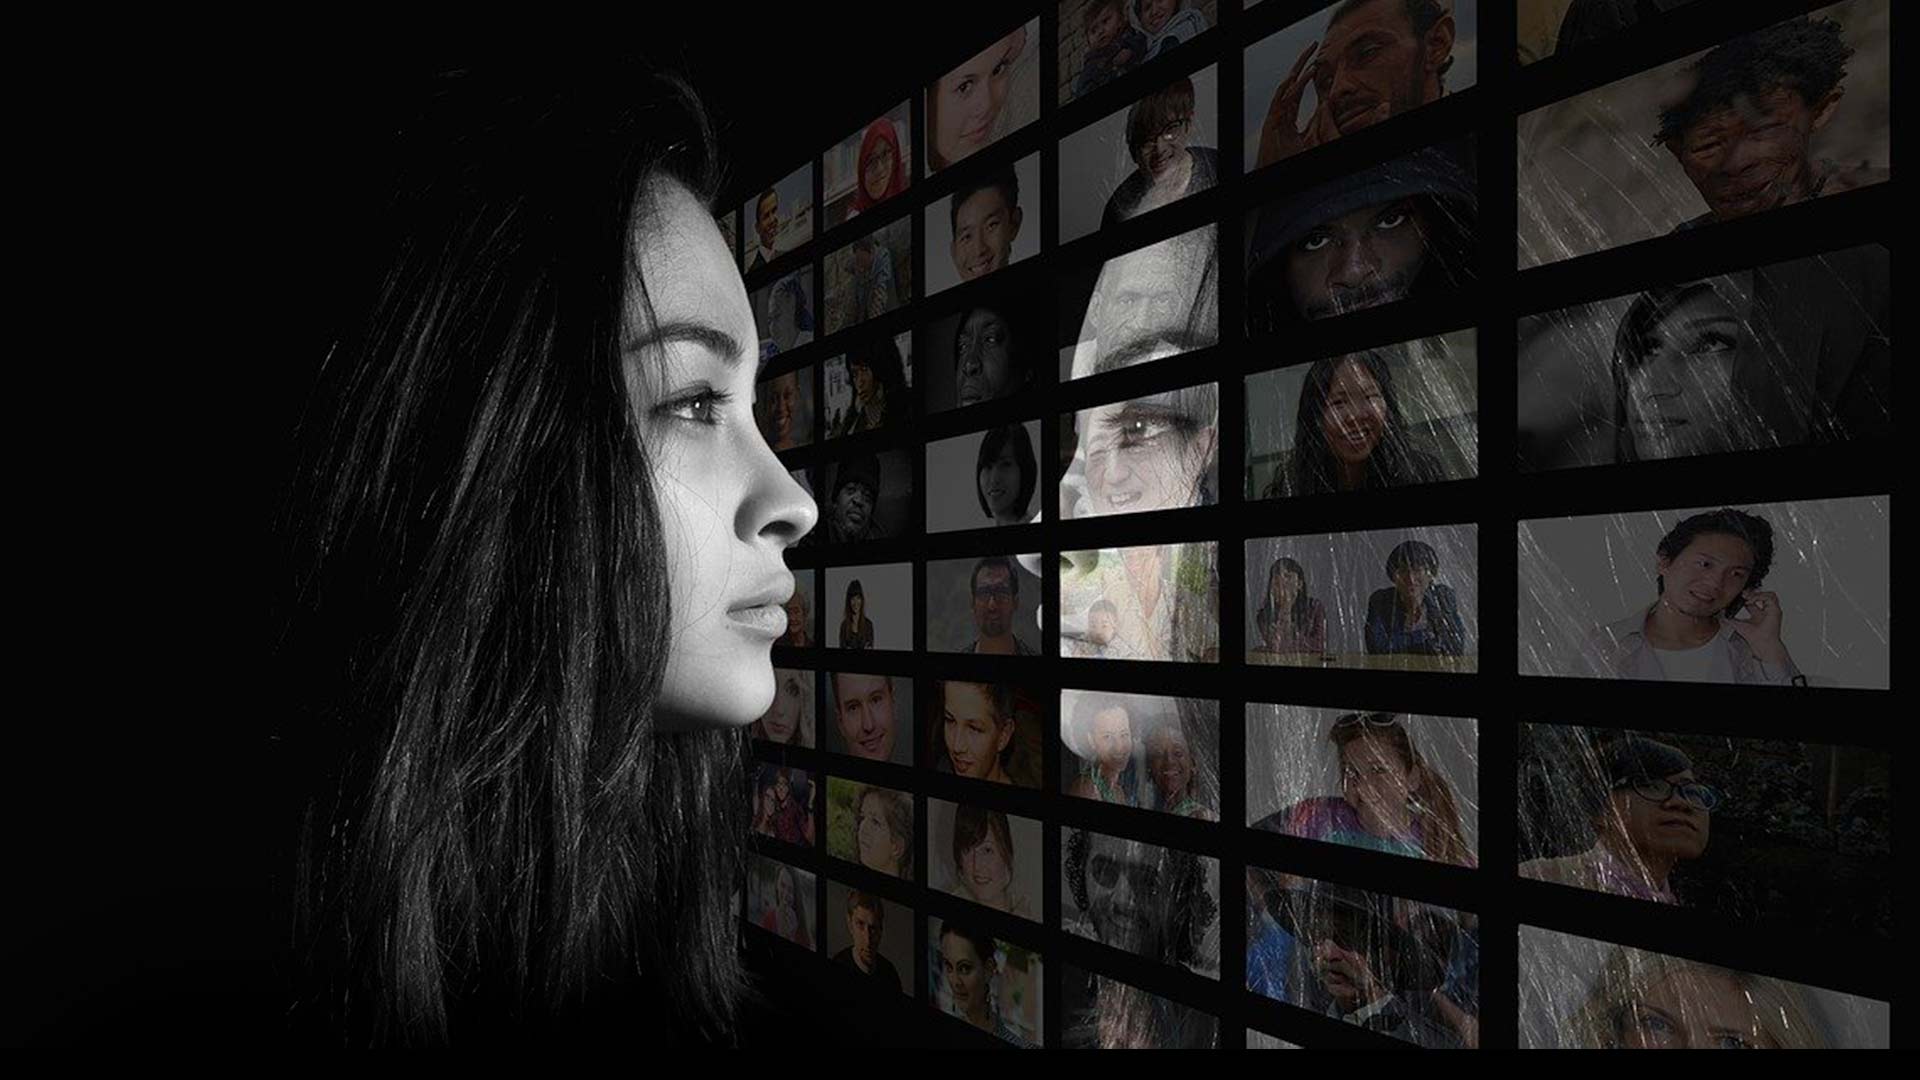 Woman looking at screen with people from different backgrounds